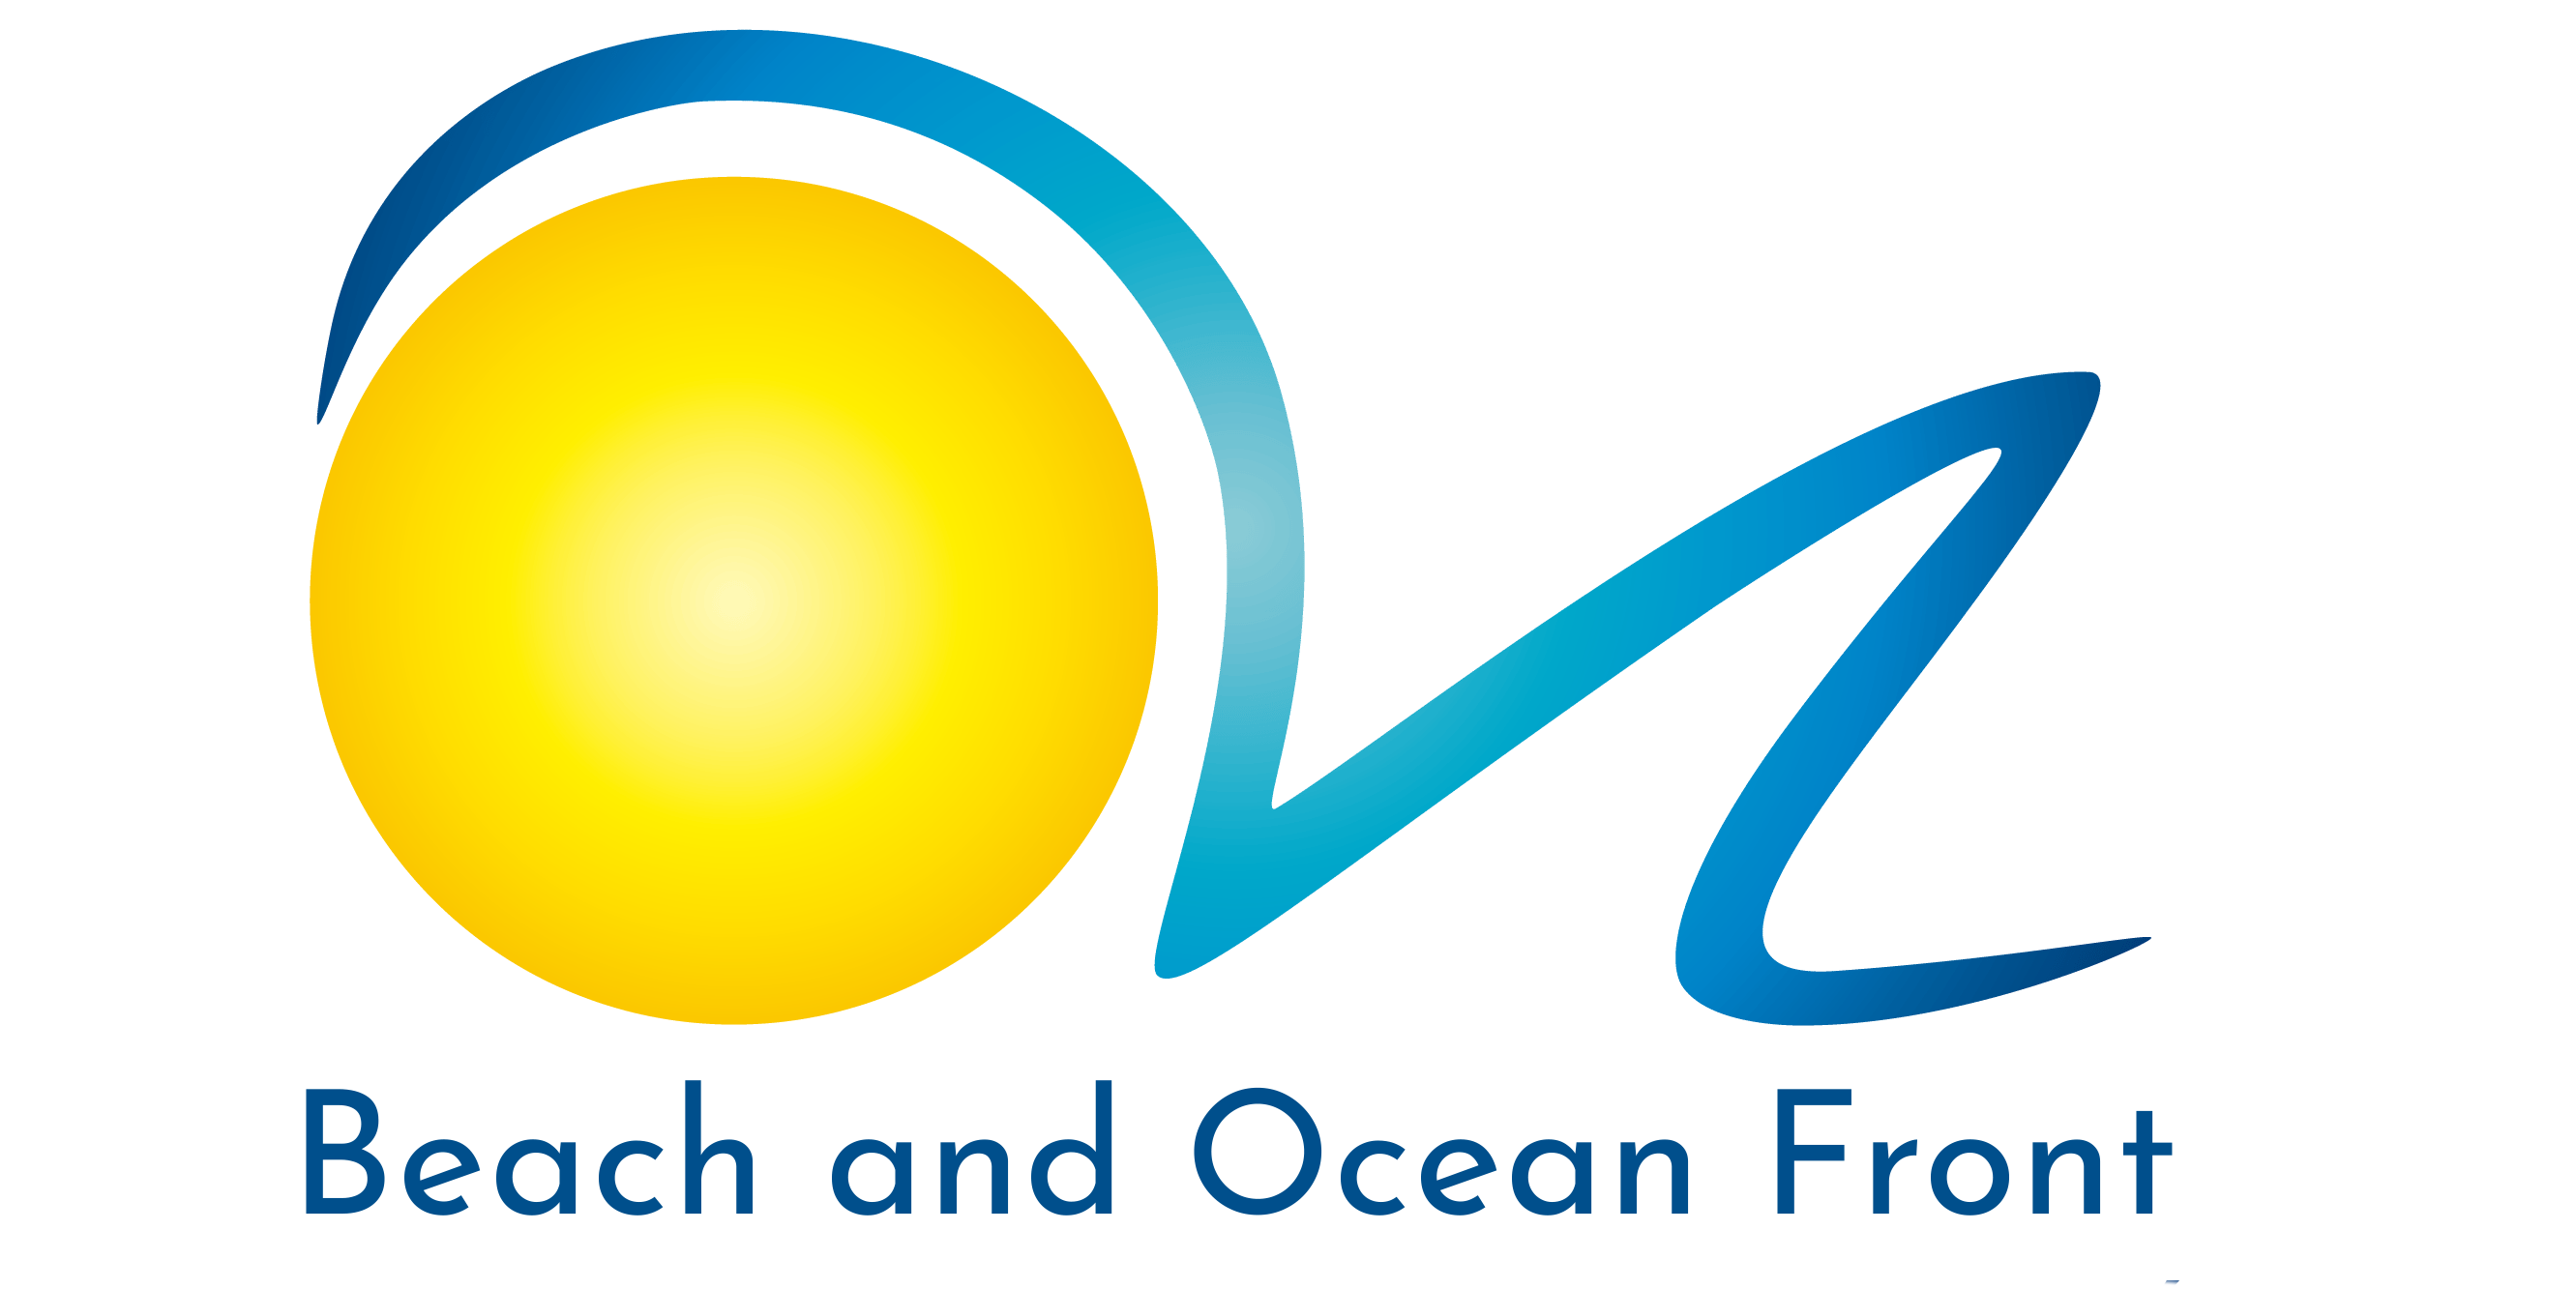 a logo for beach and ocean front with a yellow sun and blue wave